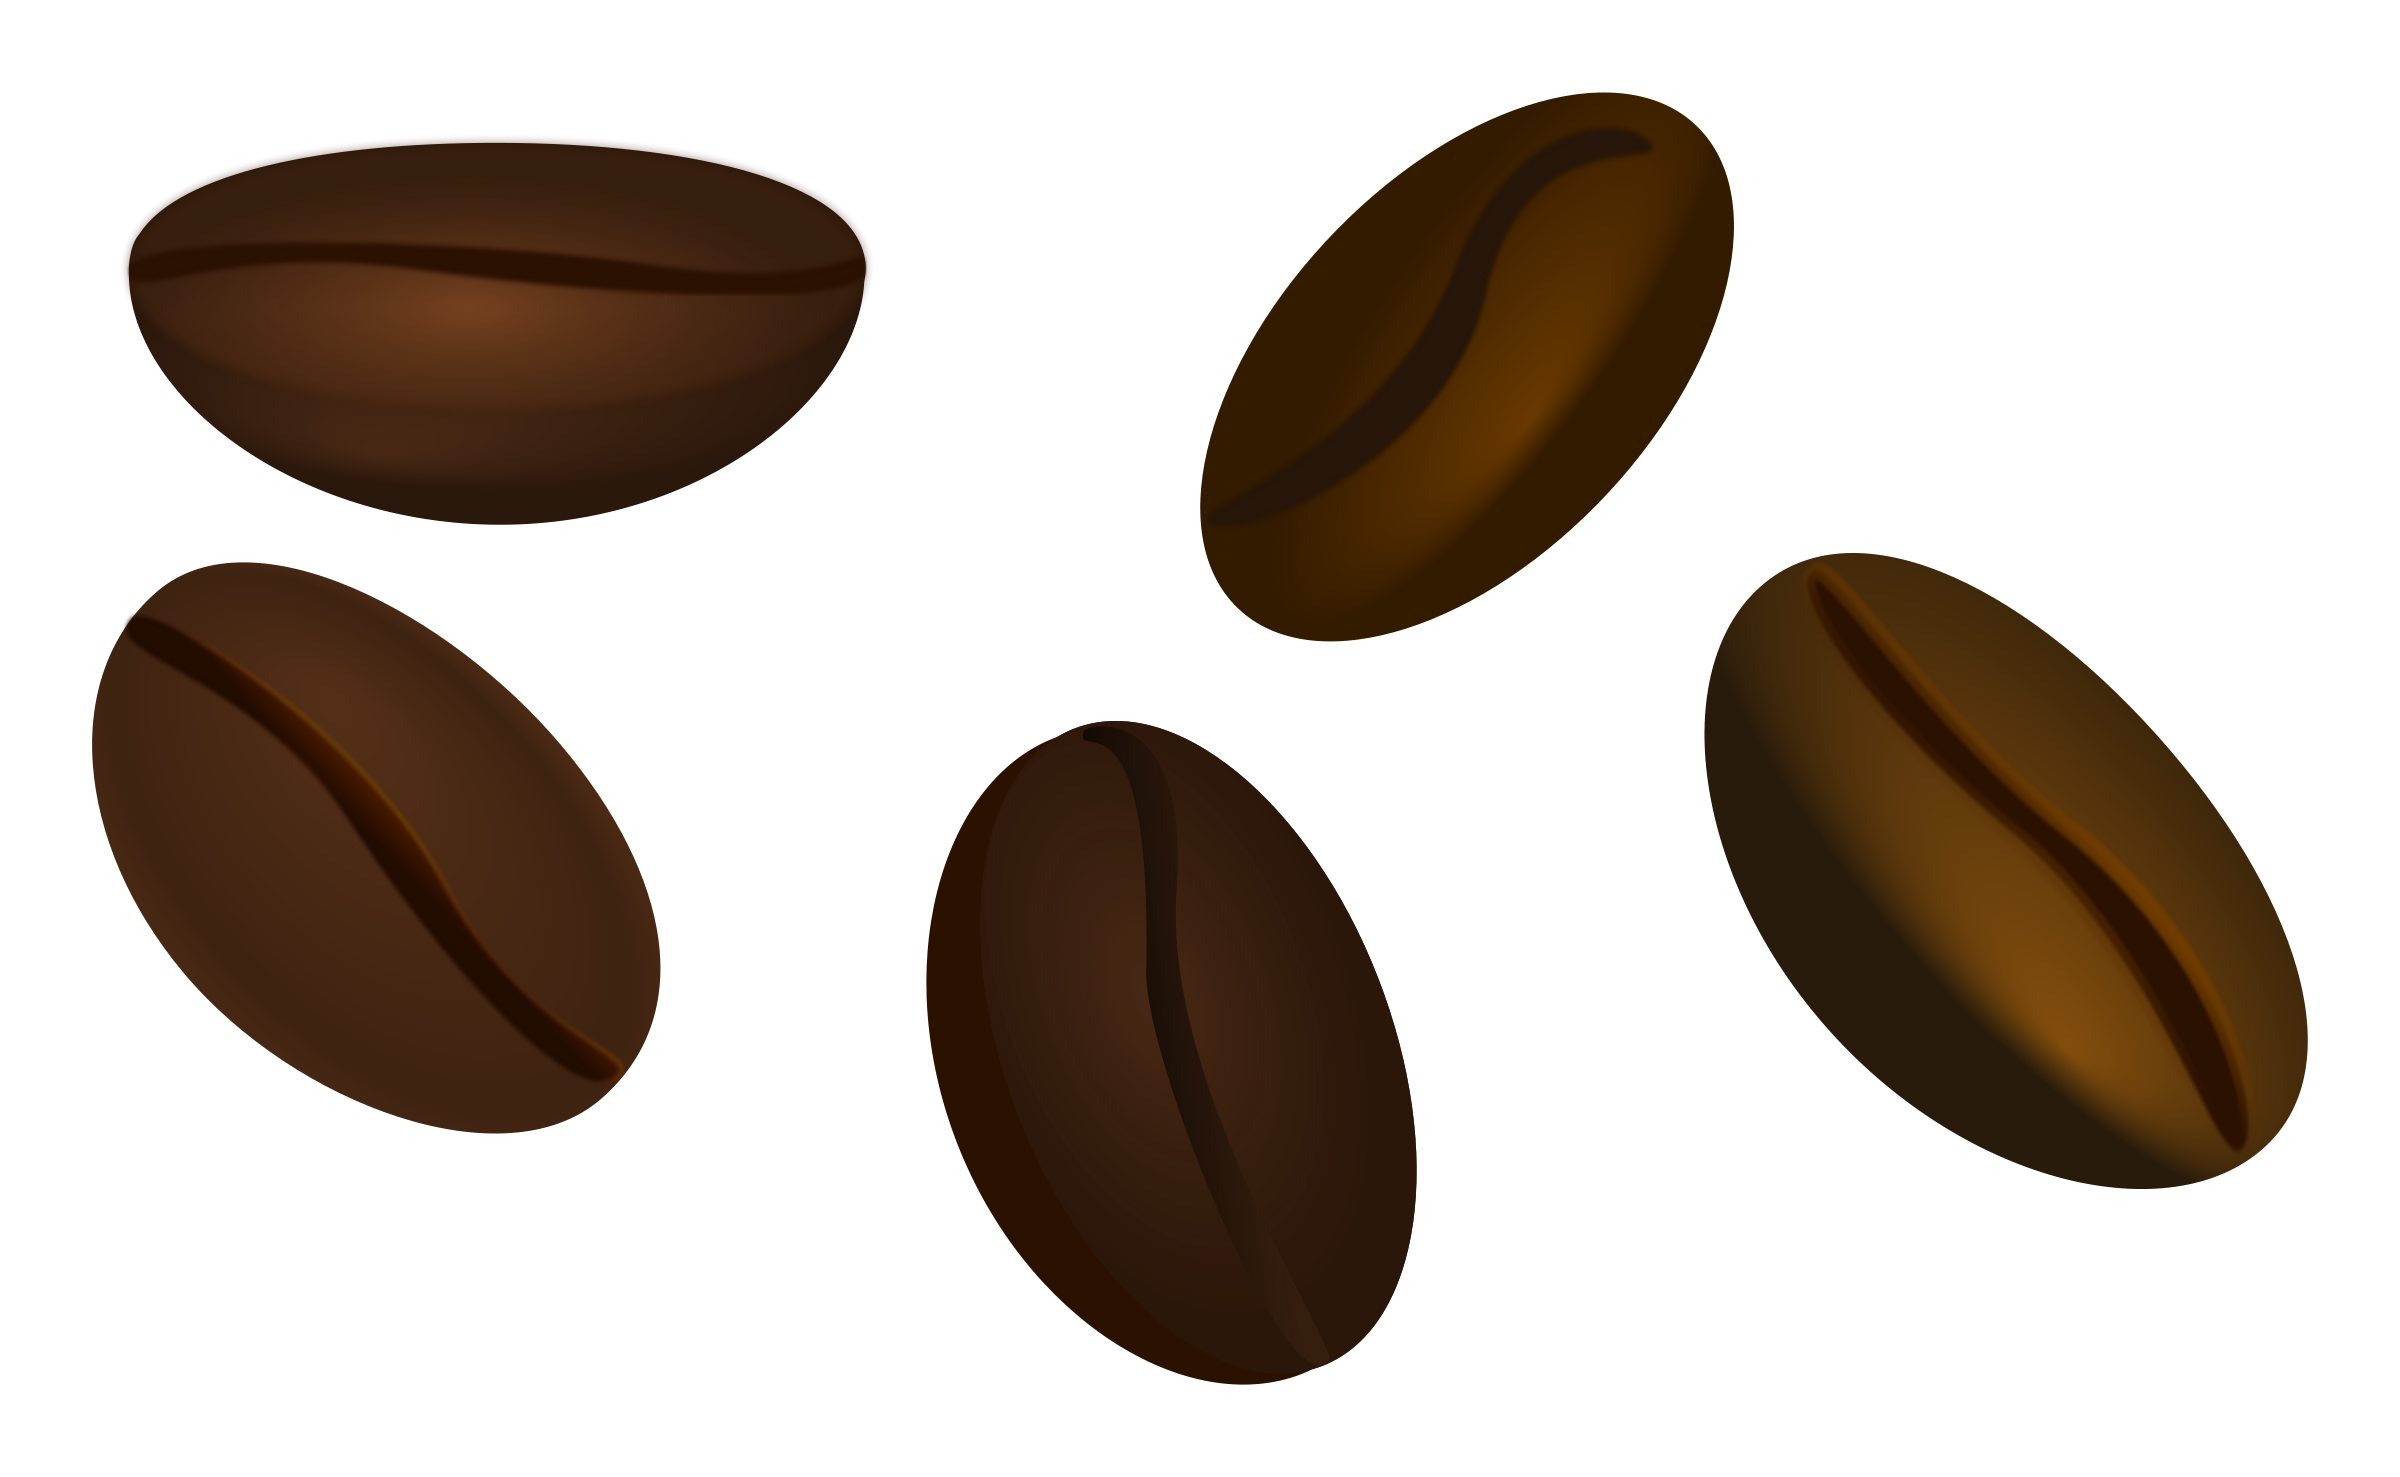 Free Transparent Coffee Cliparts, Download Free Clip Art.